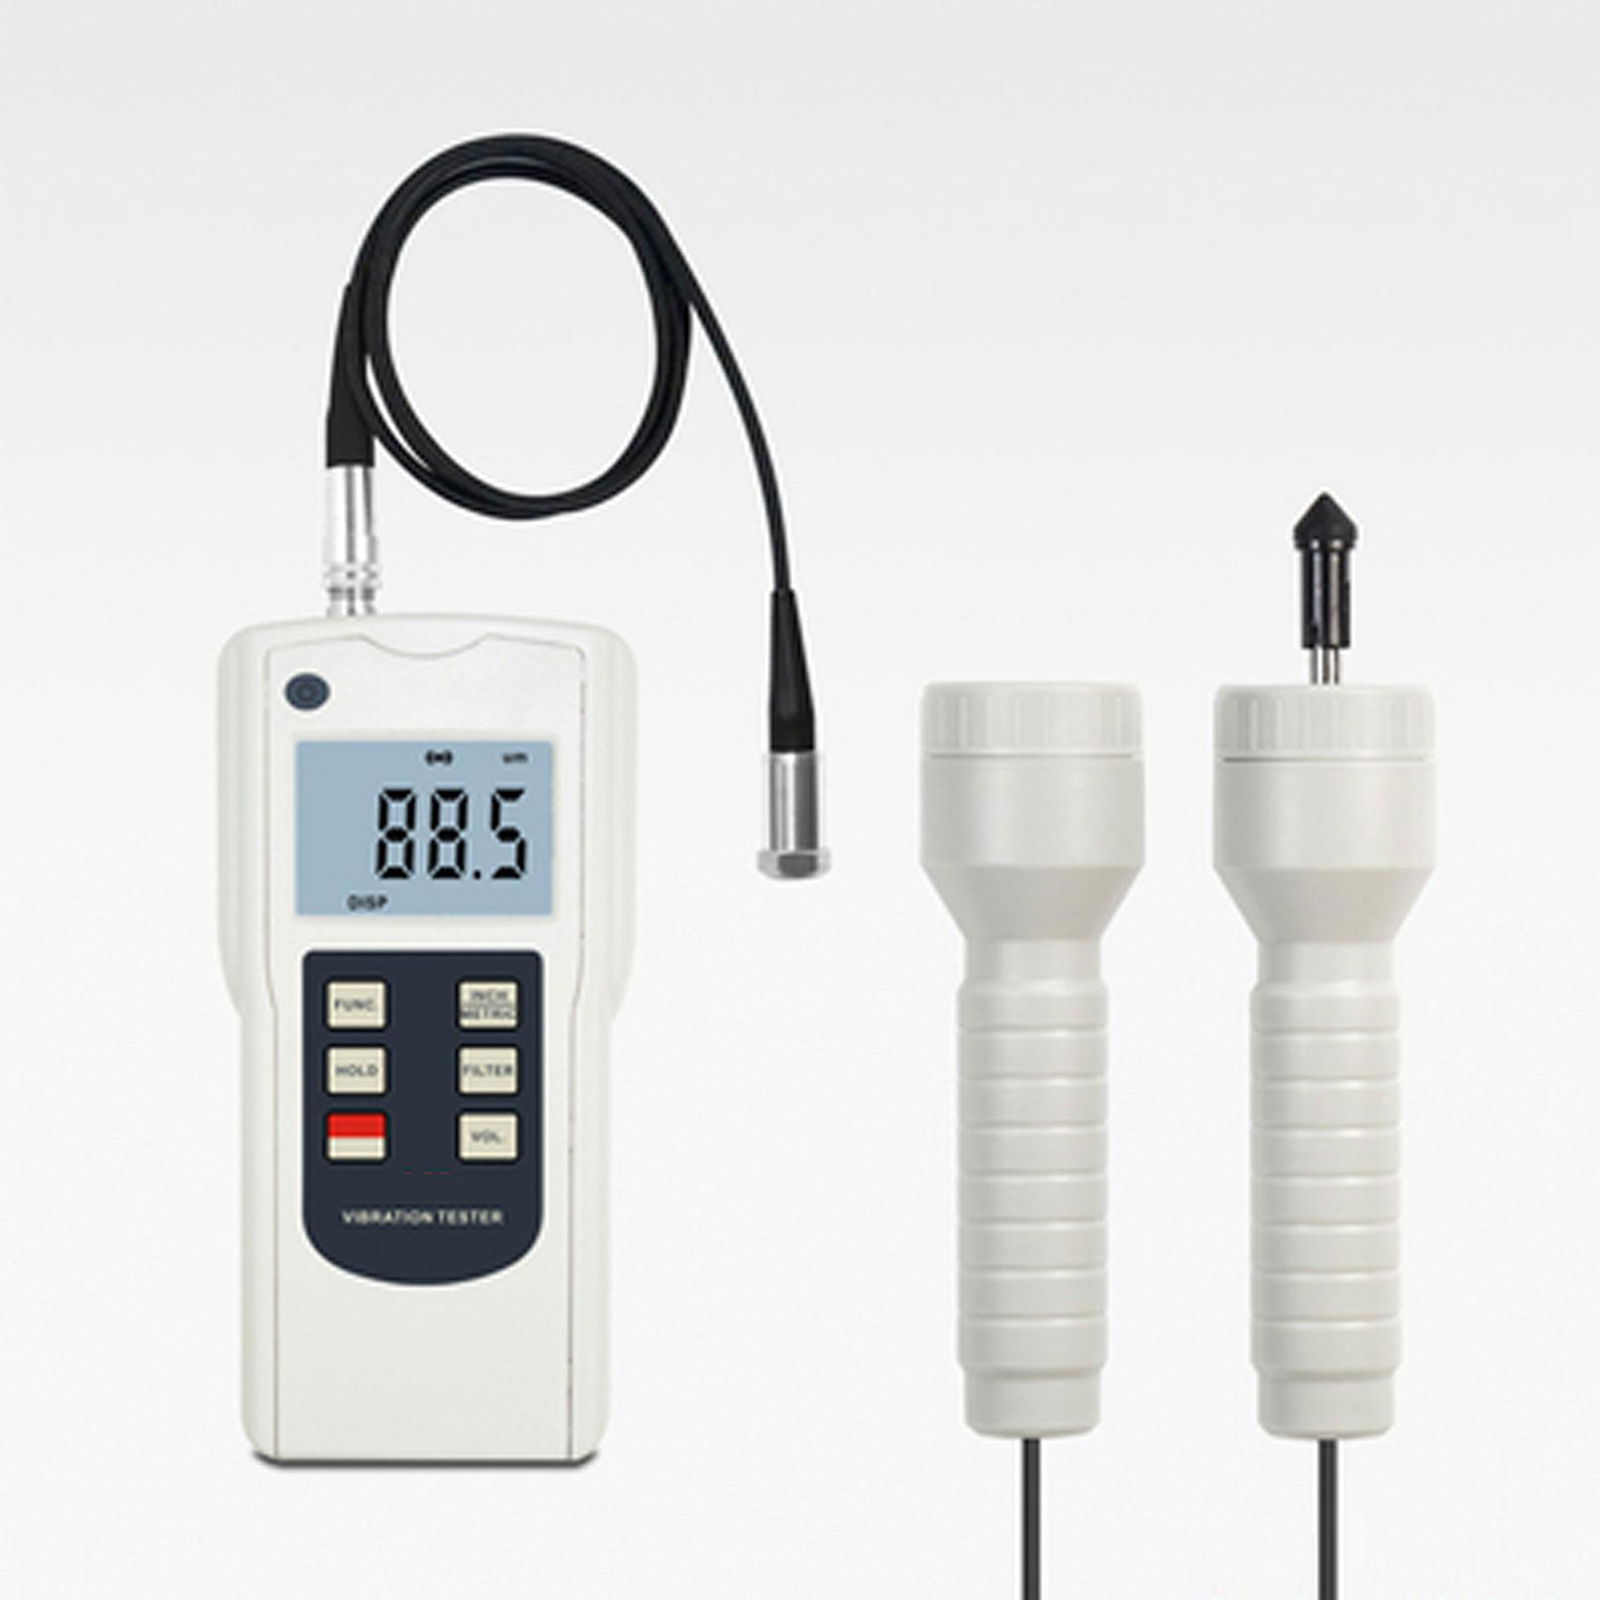 Vibration Tester AV-160T Can Measure Rotation rate RPM(r/min) & Frequency Hz